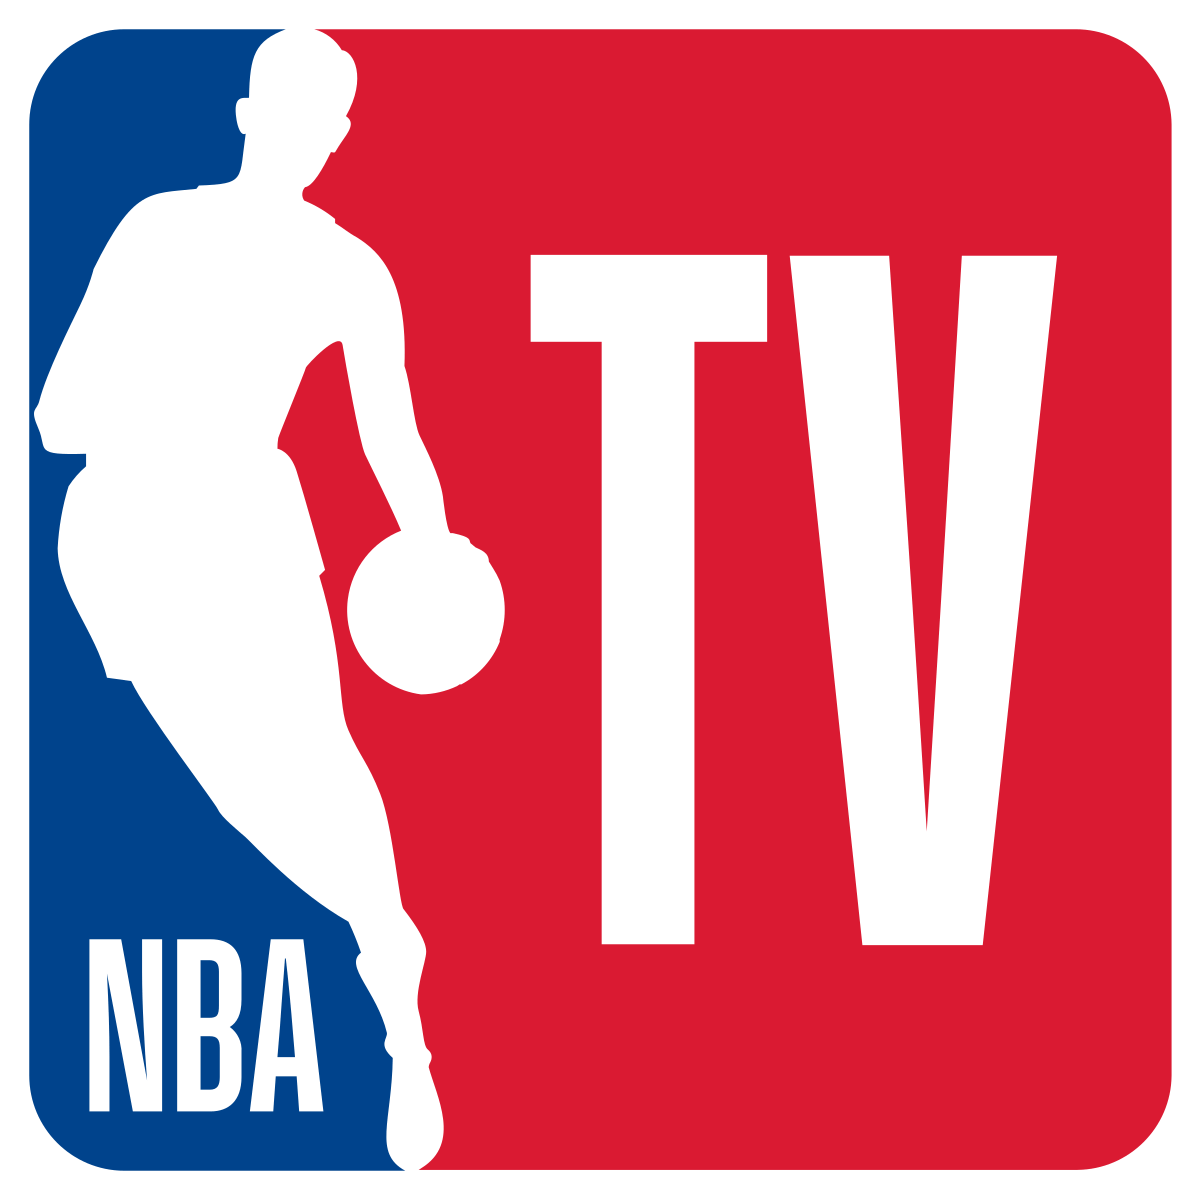 Yule Log Channel On Direct TV / NBA TV Offering Free Preview of League ...